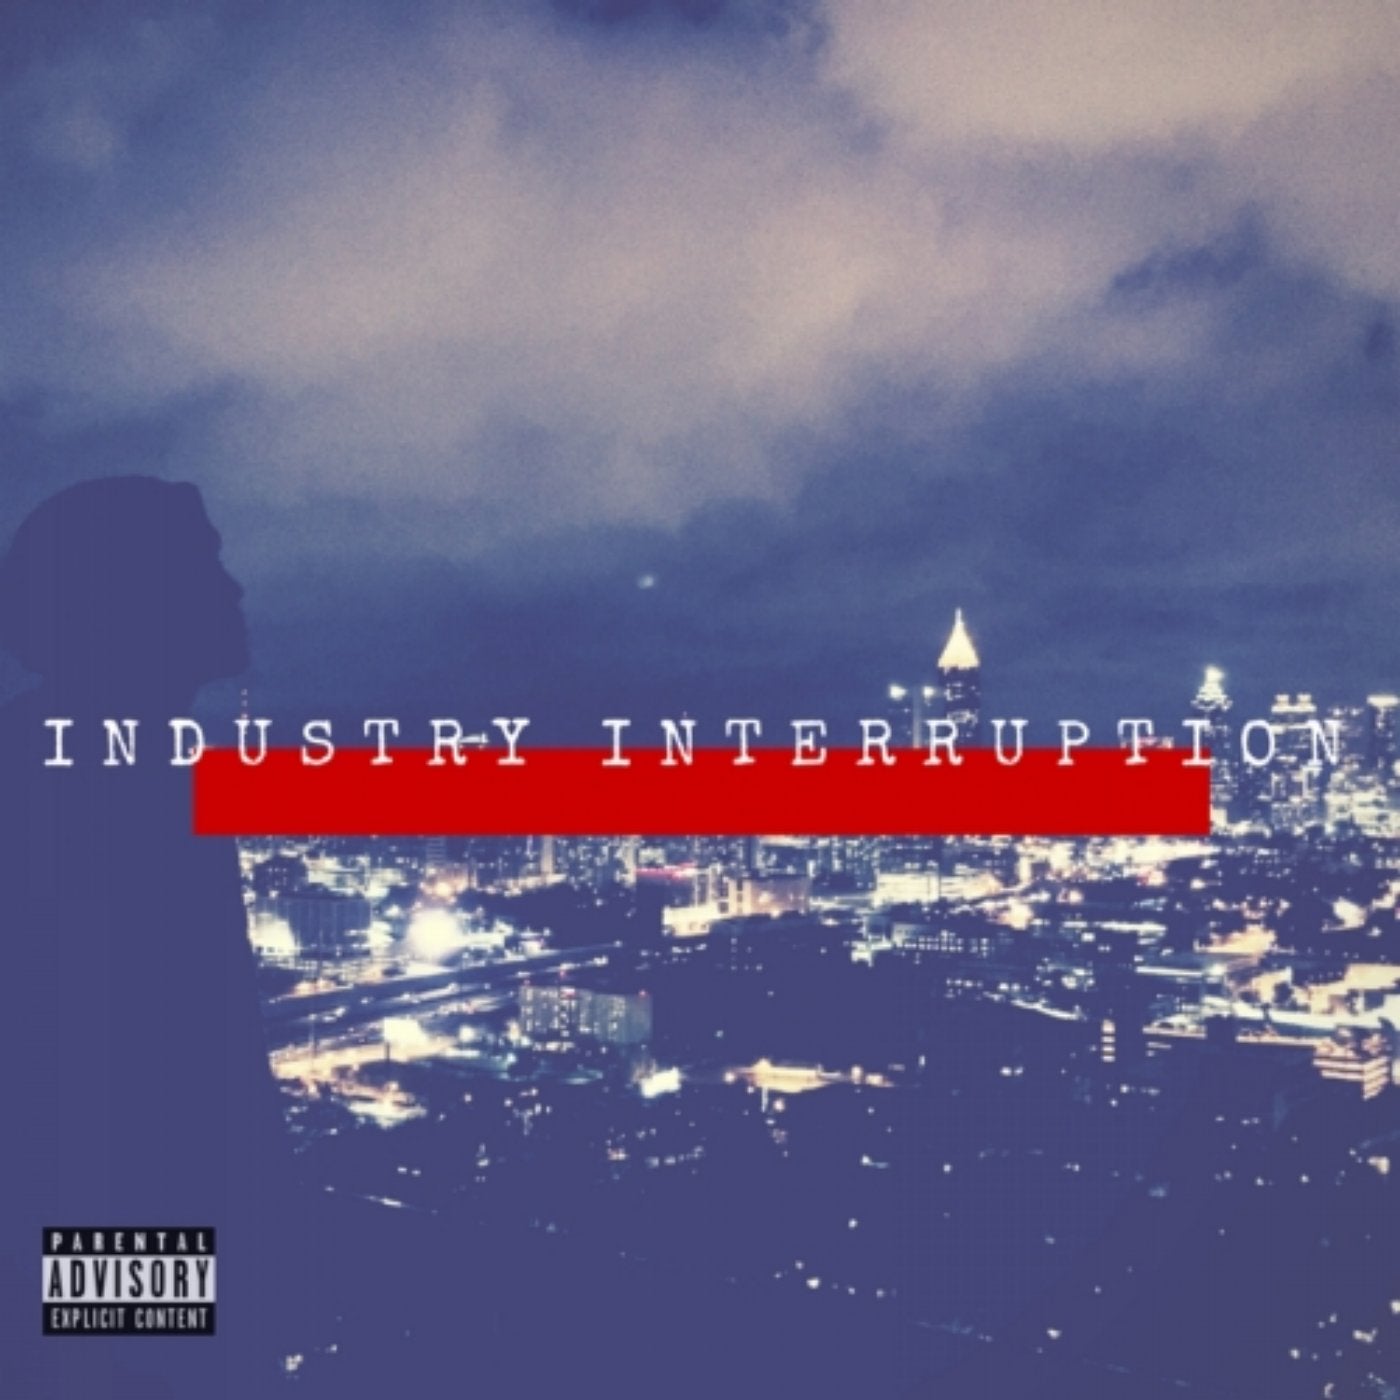 The Industry Interruption